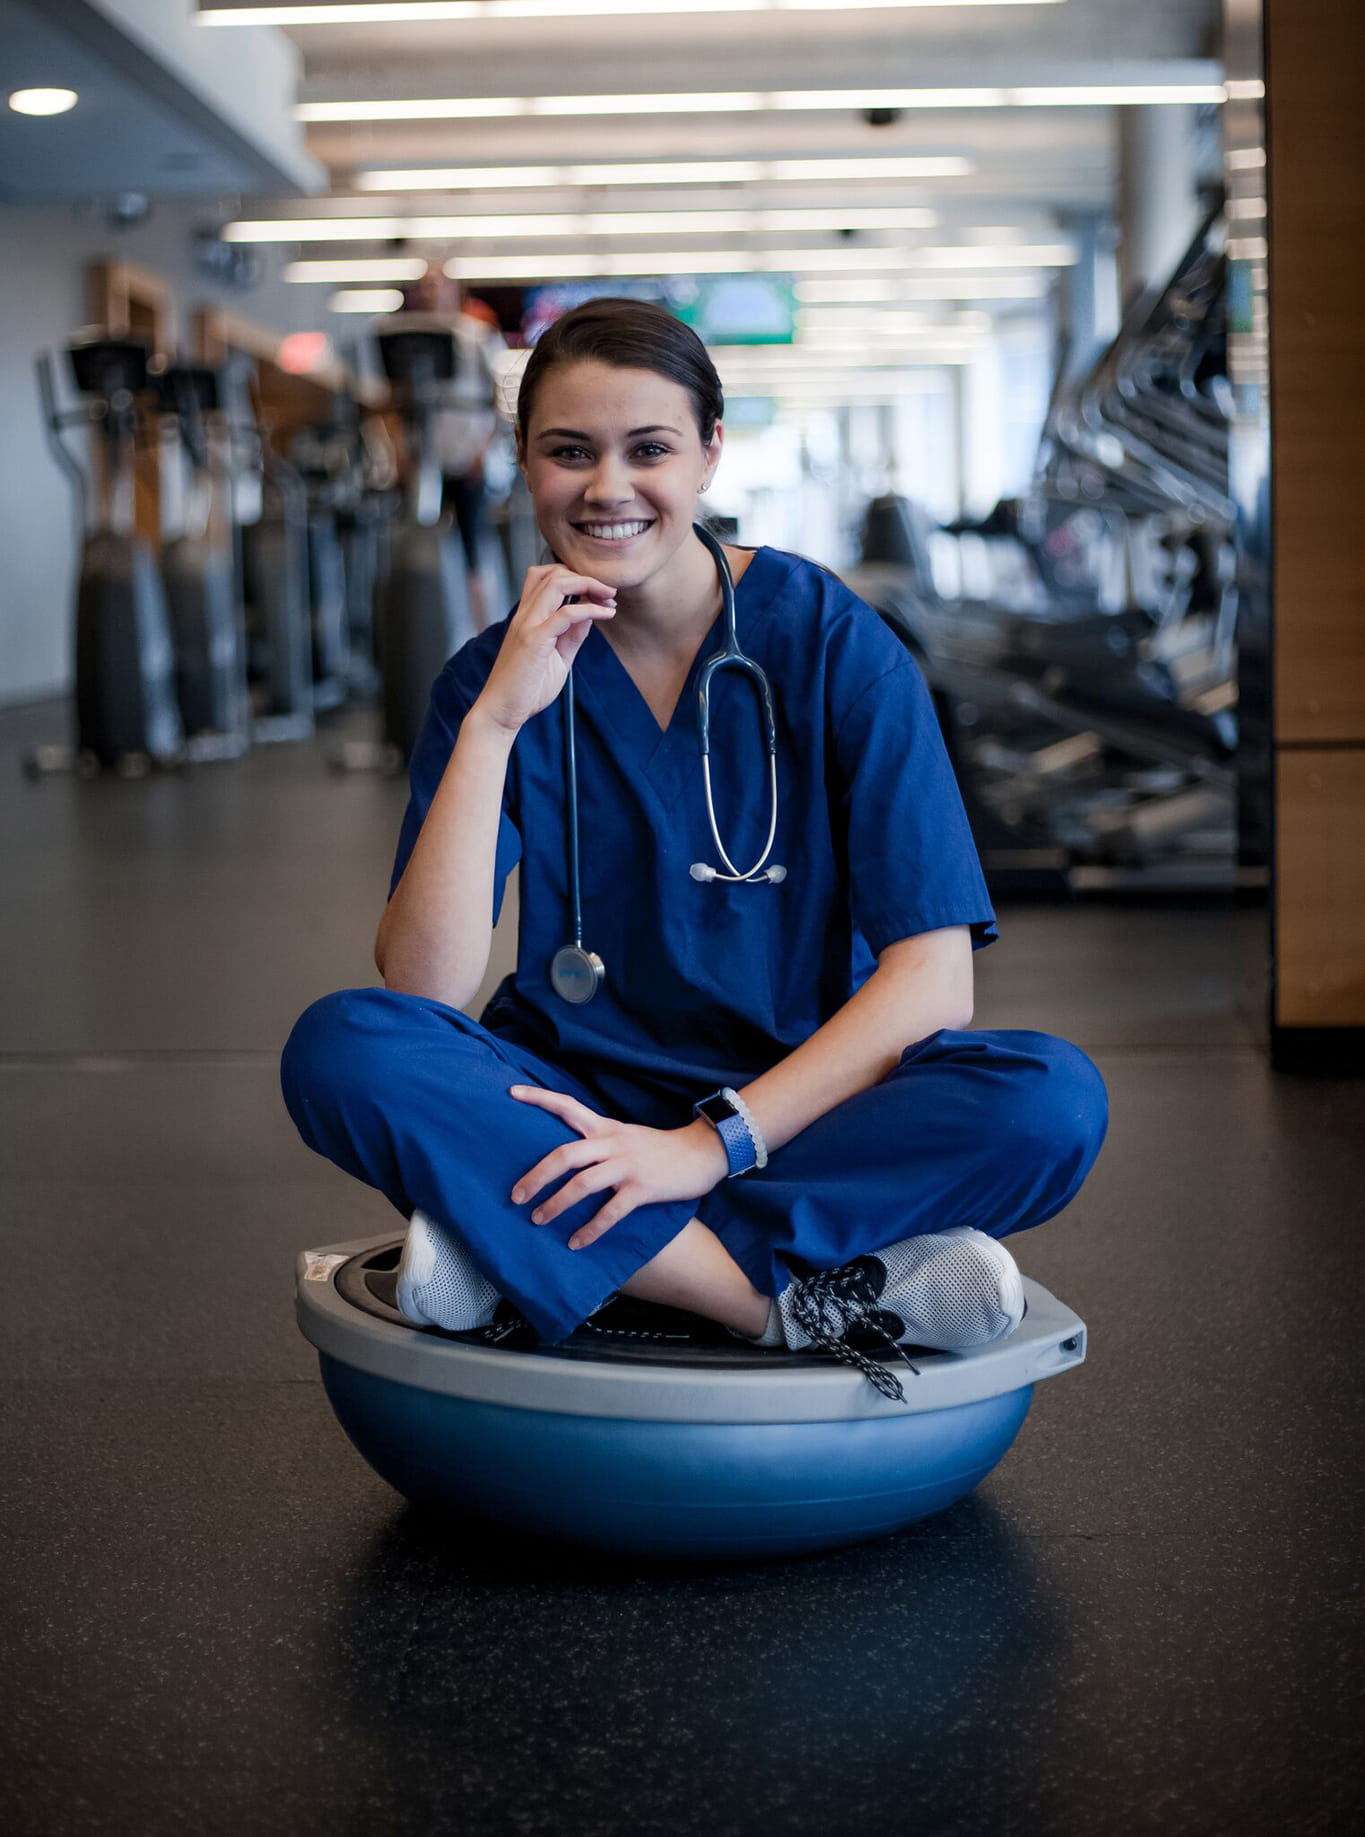 Julia Golkin, a health sciences and health administration major in the College of Nursing and Health Professions, loves the Rec Center because it helps her so she can "just de-stress and can zone out with my music and just take some time for myself."